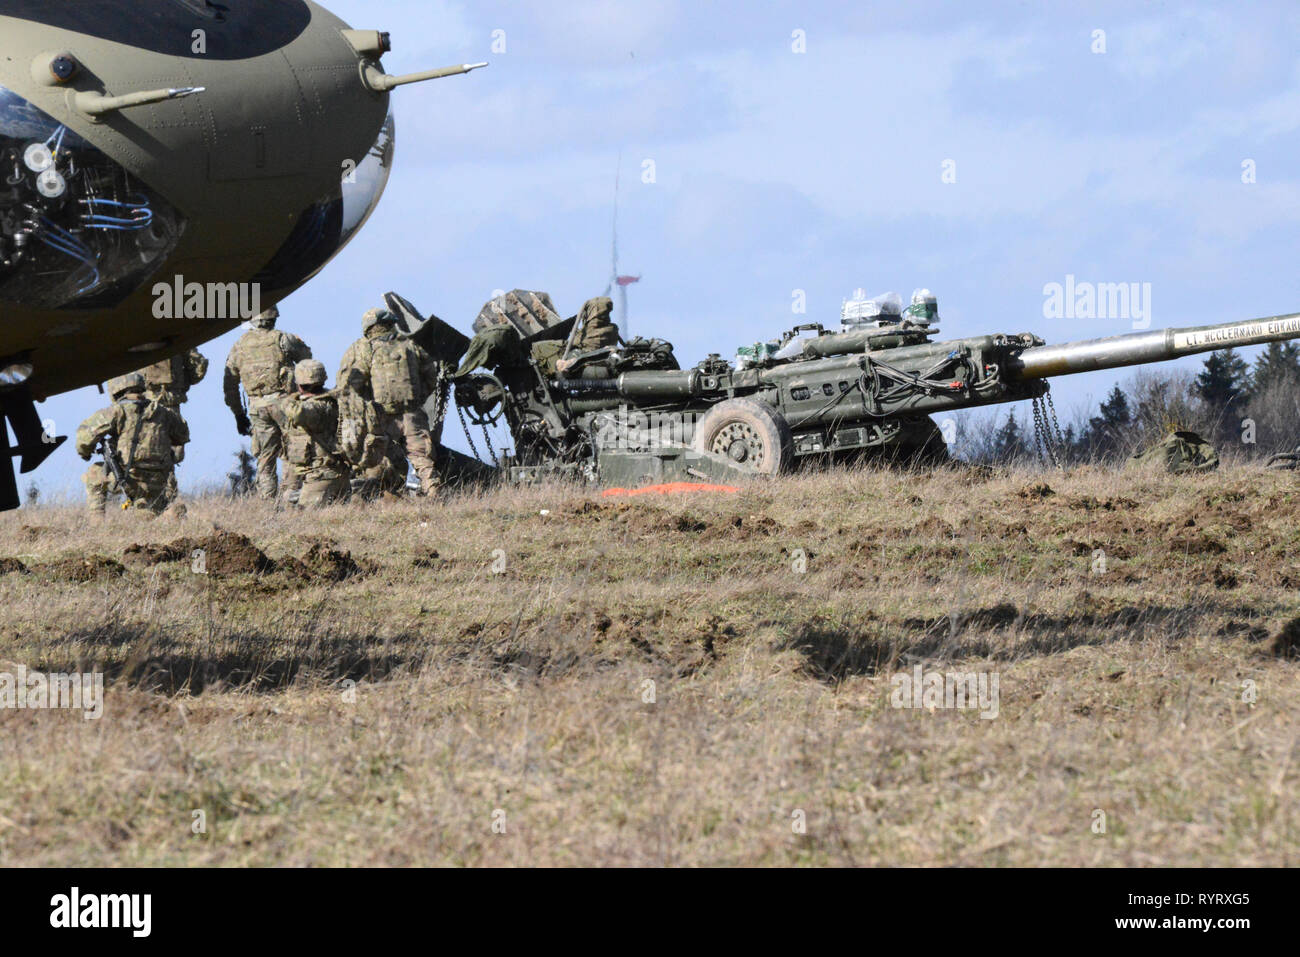 U.S. Army Soldiers assigned to Bulldog Battery, Field Artillery Squadron, 2d Cavalry Regiment, prepare a M777 Howitzer during an air assault mission at the 7th Army Training Command’s Grafenwoehr Training Area, Germany, March 12, 2019. (U.S. Army photo by Matthias Fruth) Stock Photo